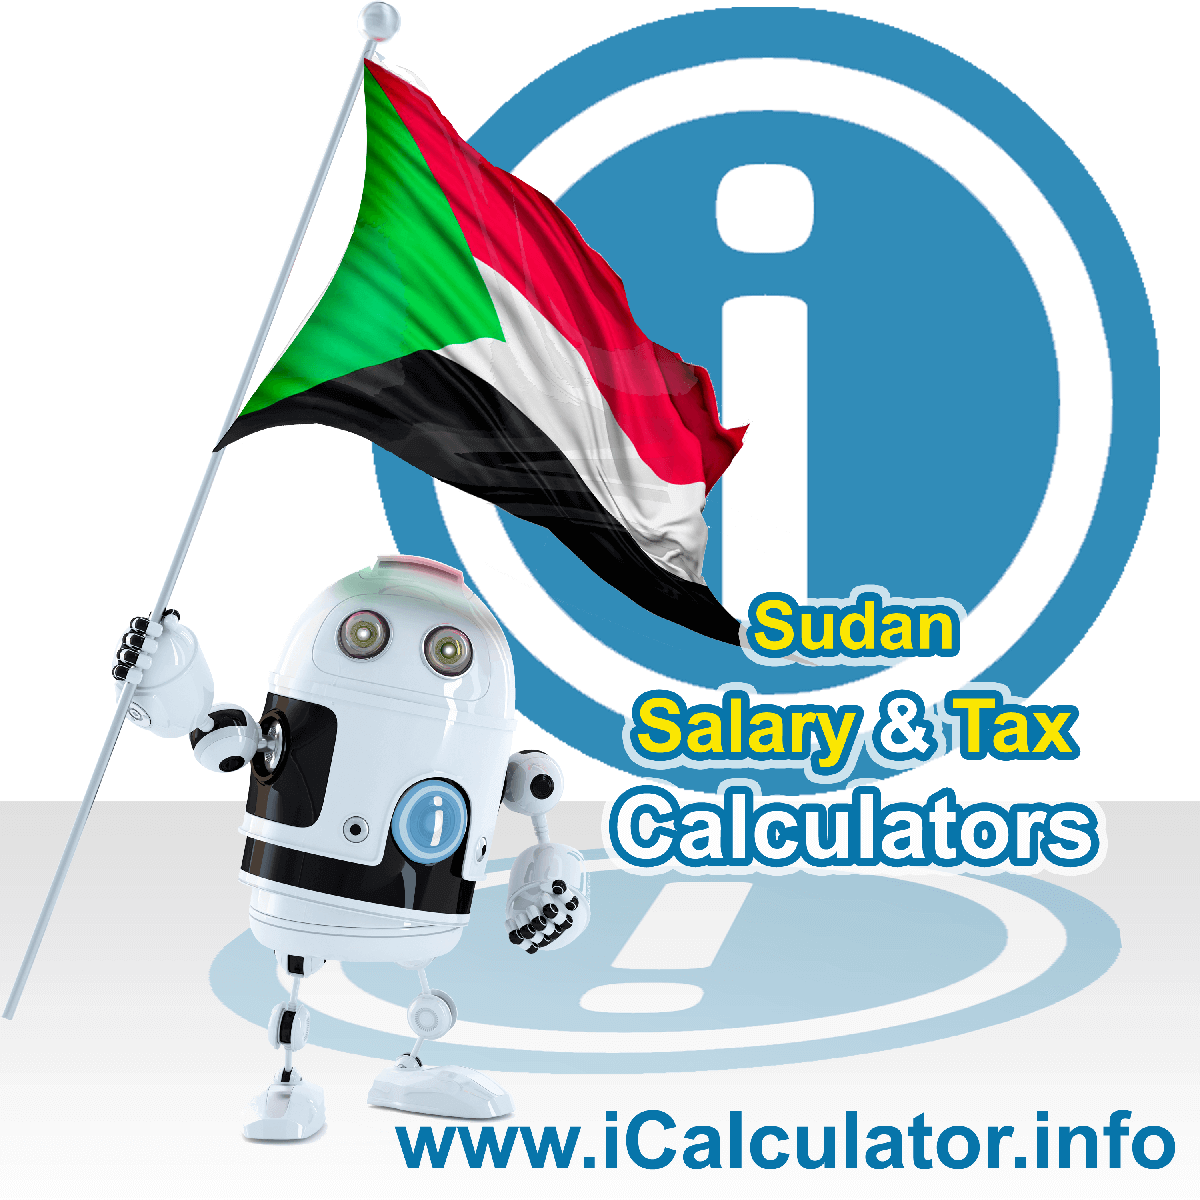 Sudan Salary Calculator. This image shows the Sudanese flag and information relating to the tax formula for the Sudan Tax Calculator